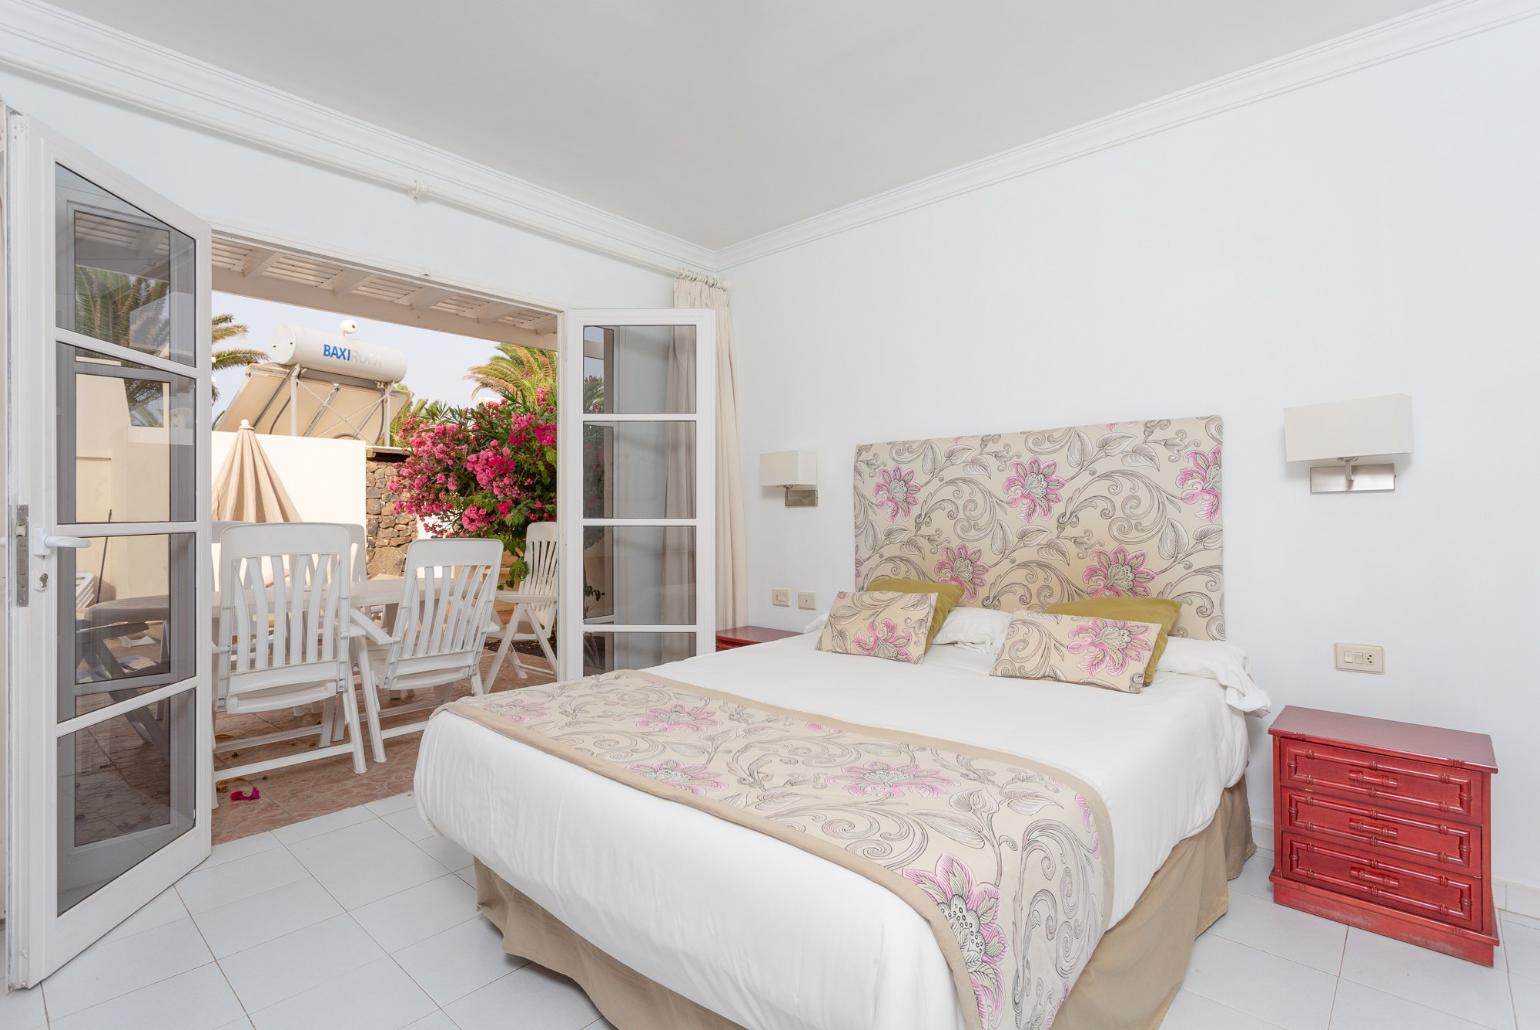 Double bedroom with terrace access